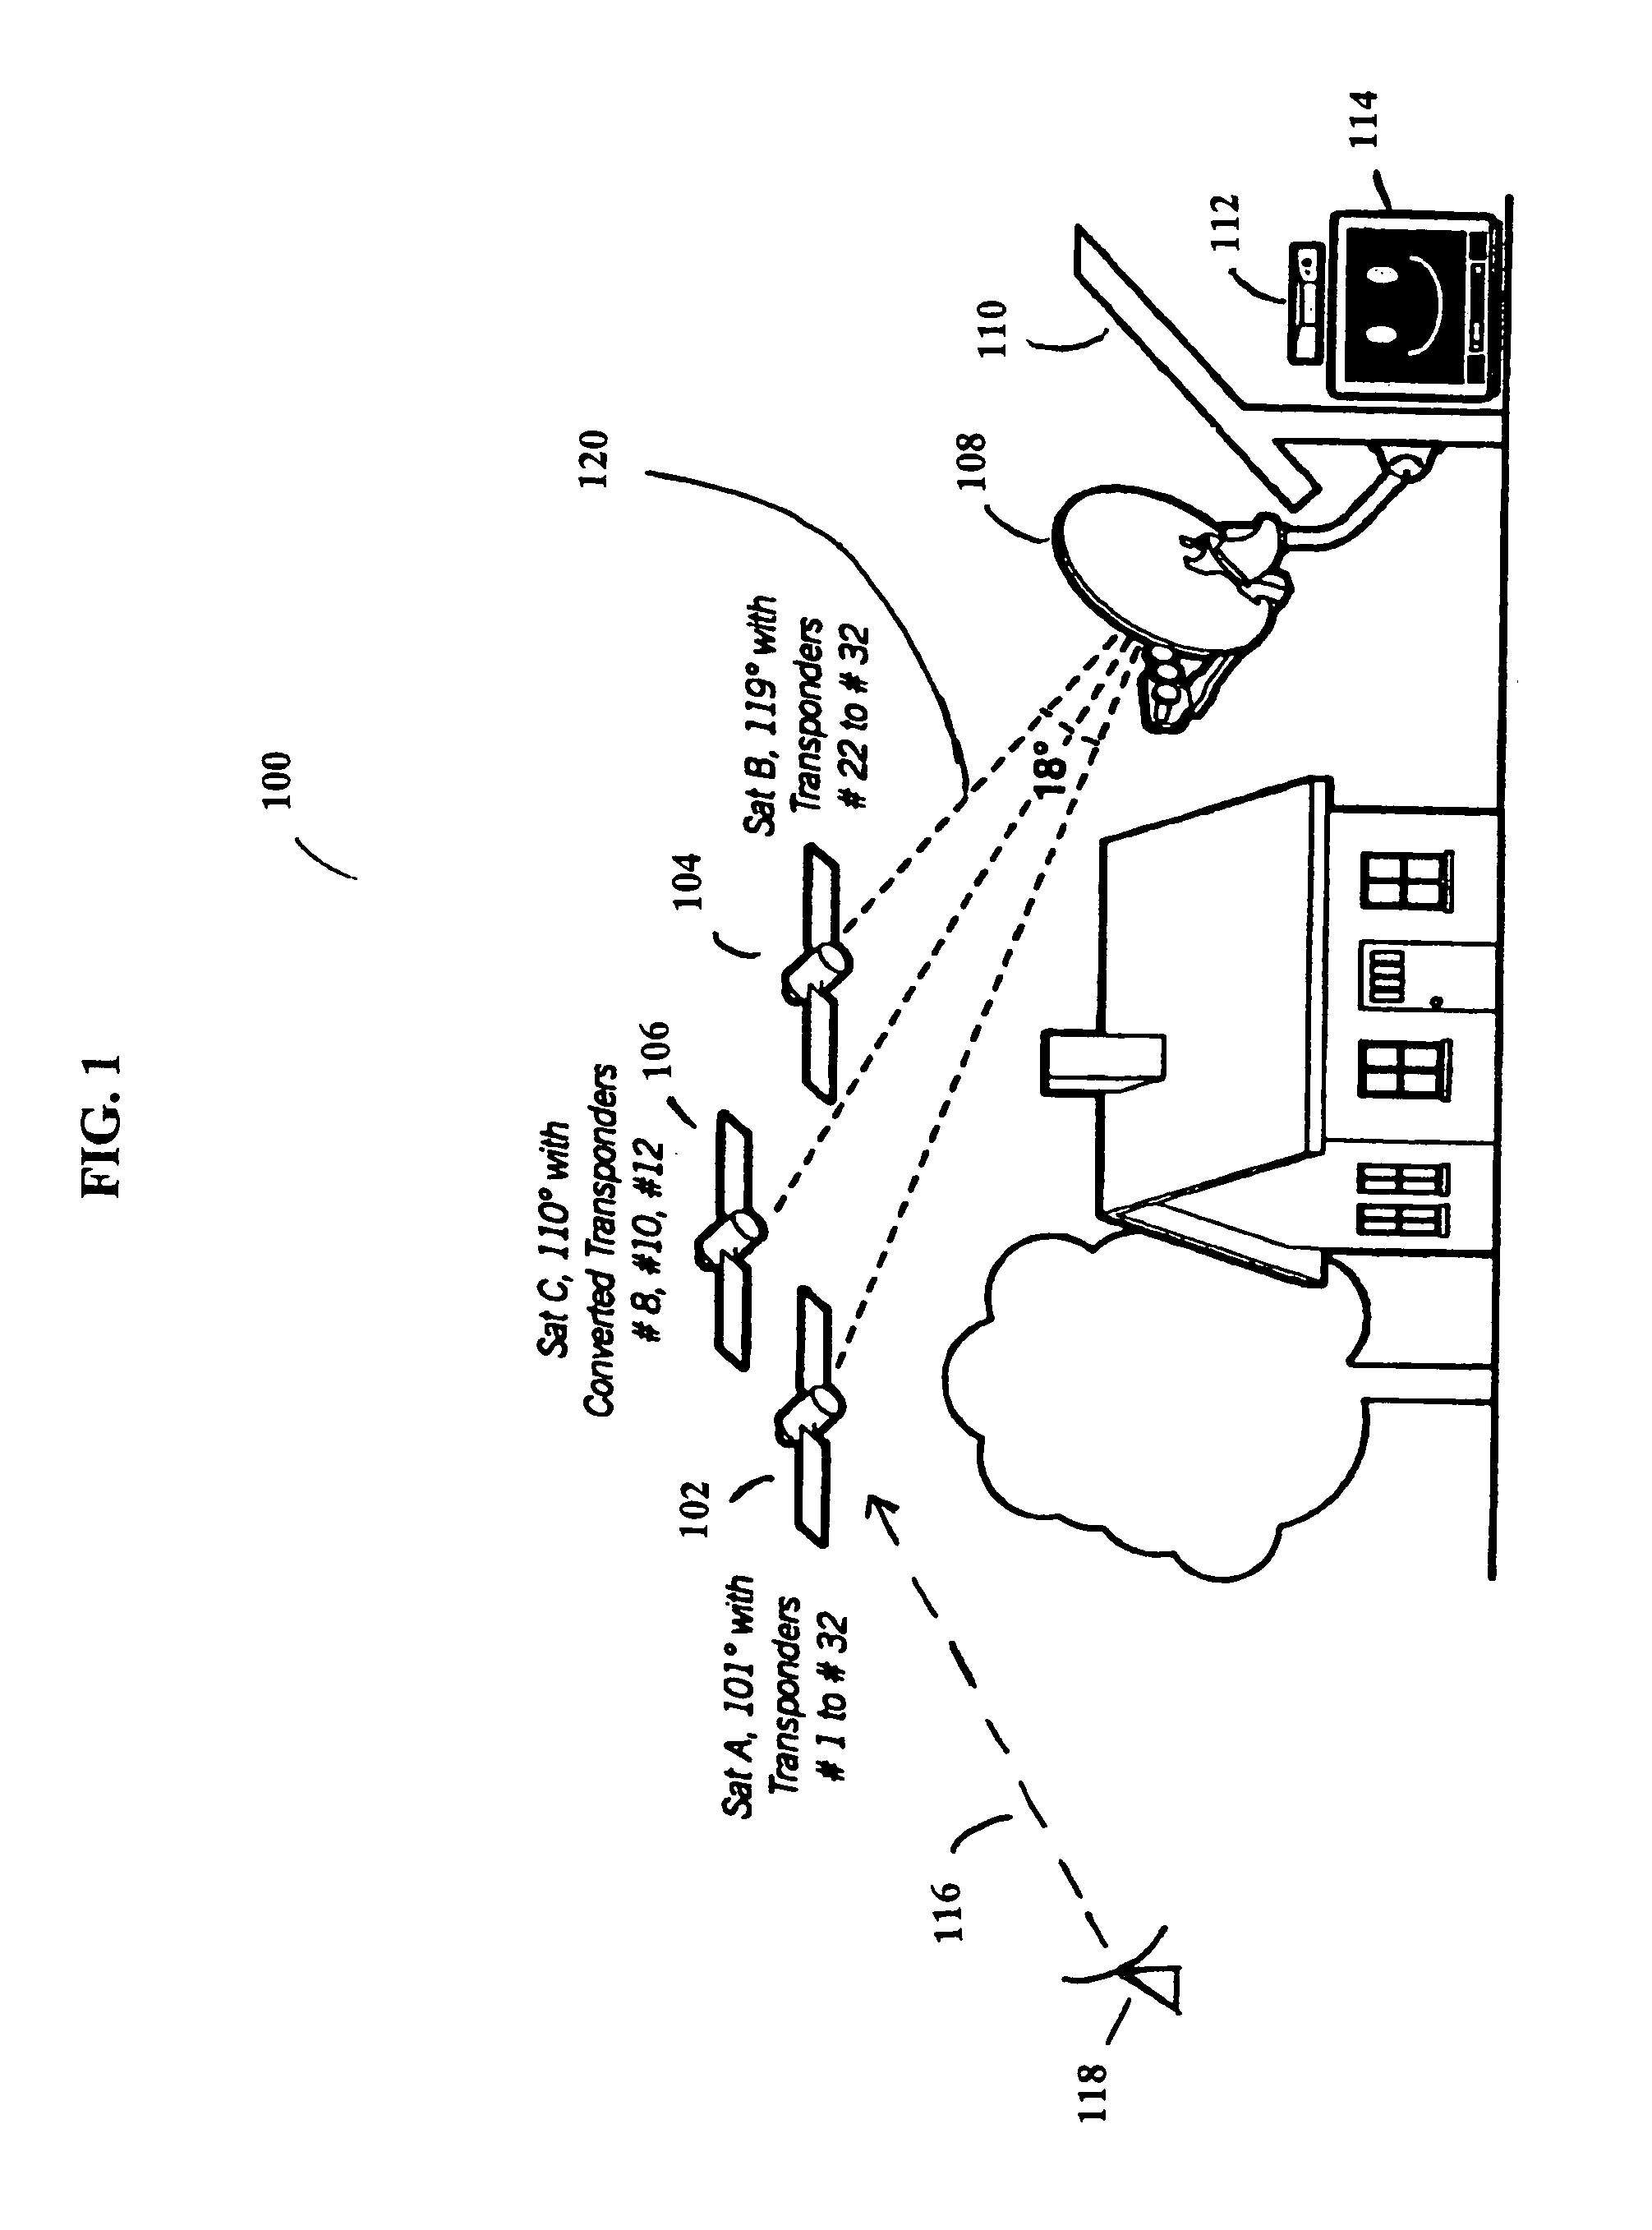 Method and apparatus for connecting satellite receiver telephone modems over coaxial cable